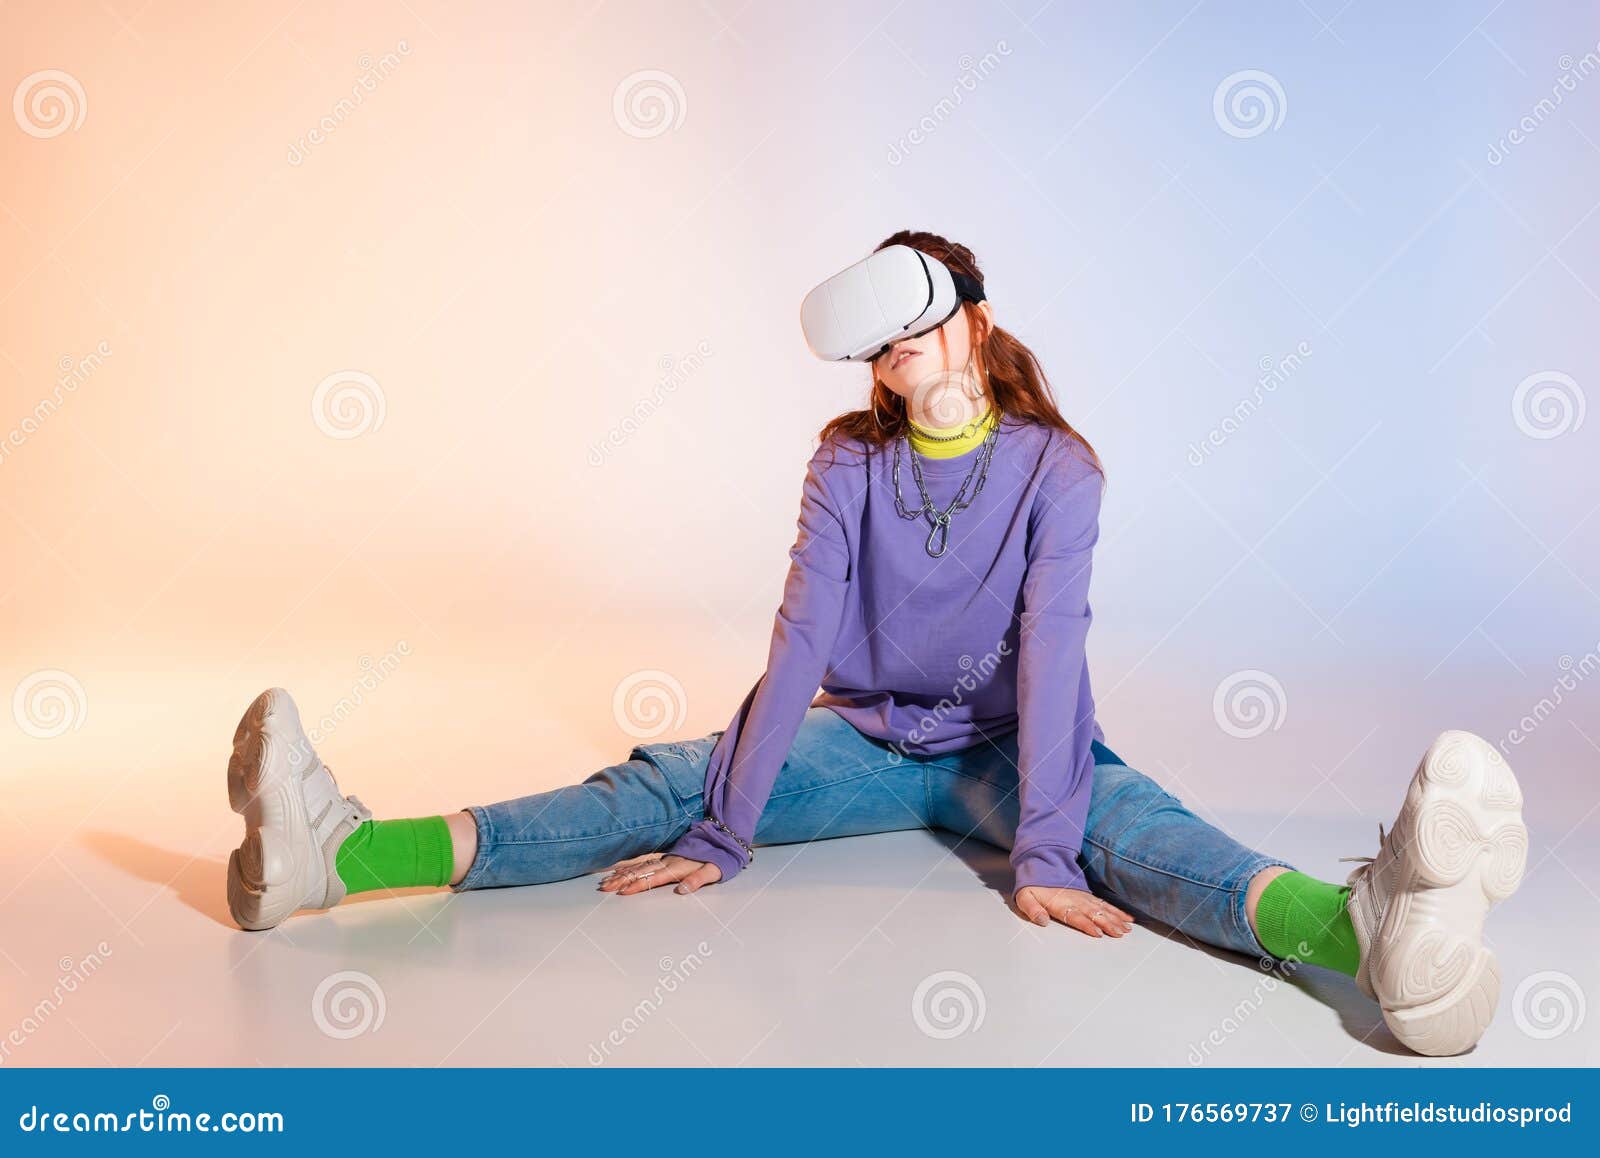 Woman In VR Headset, Information Interface Stock Photo 